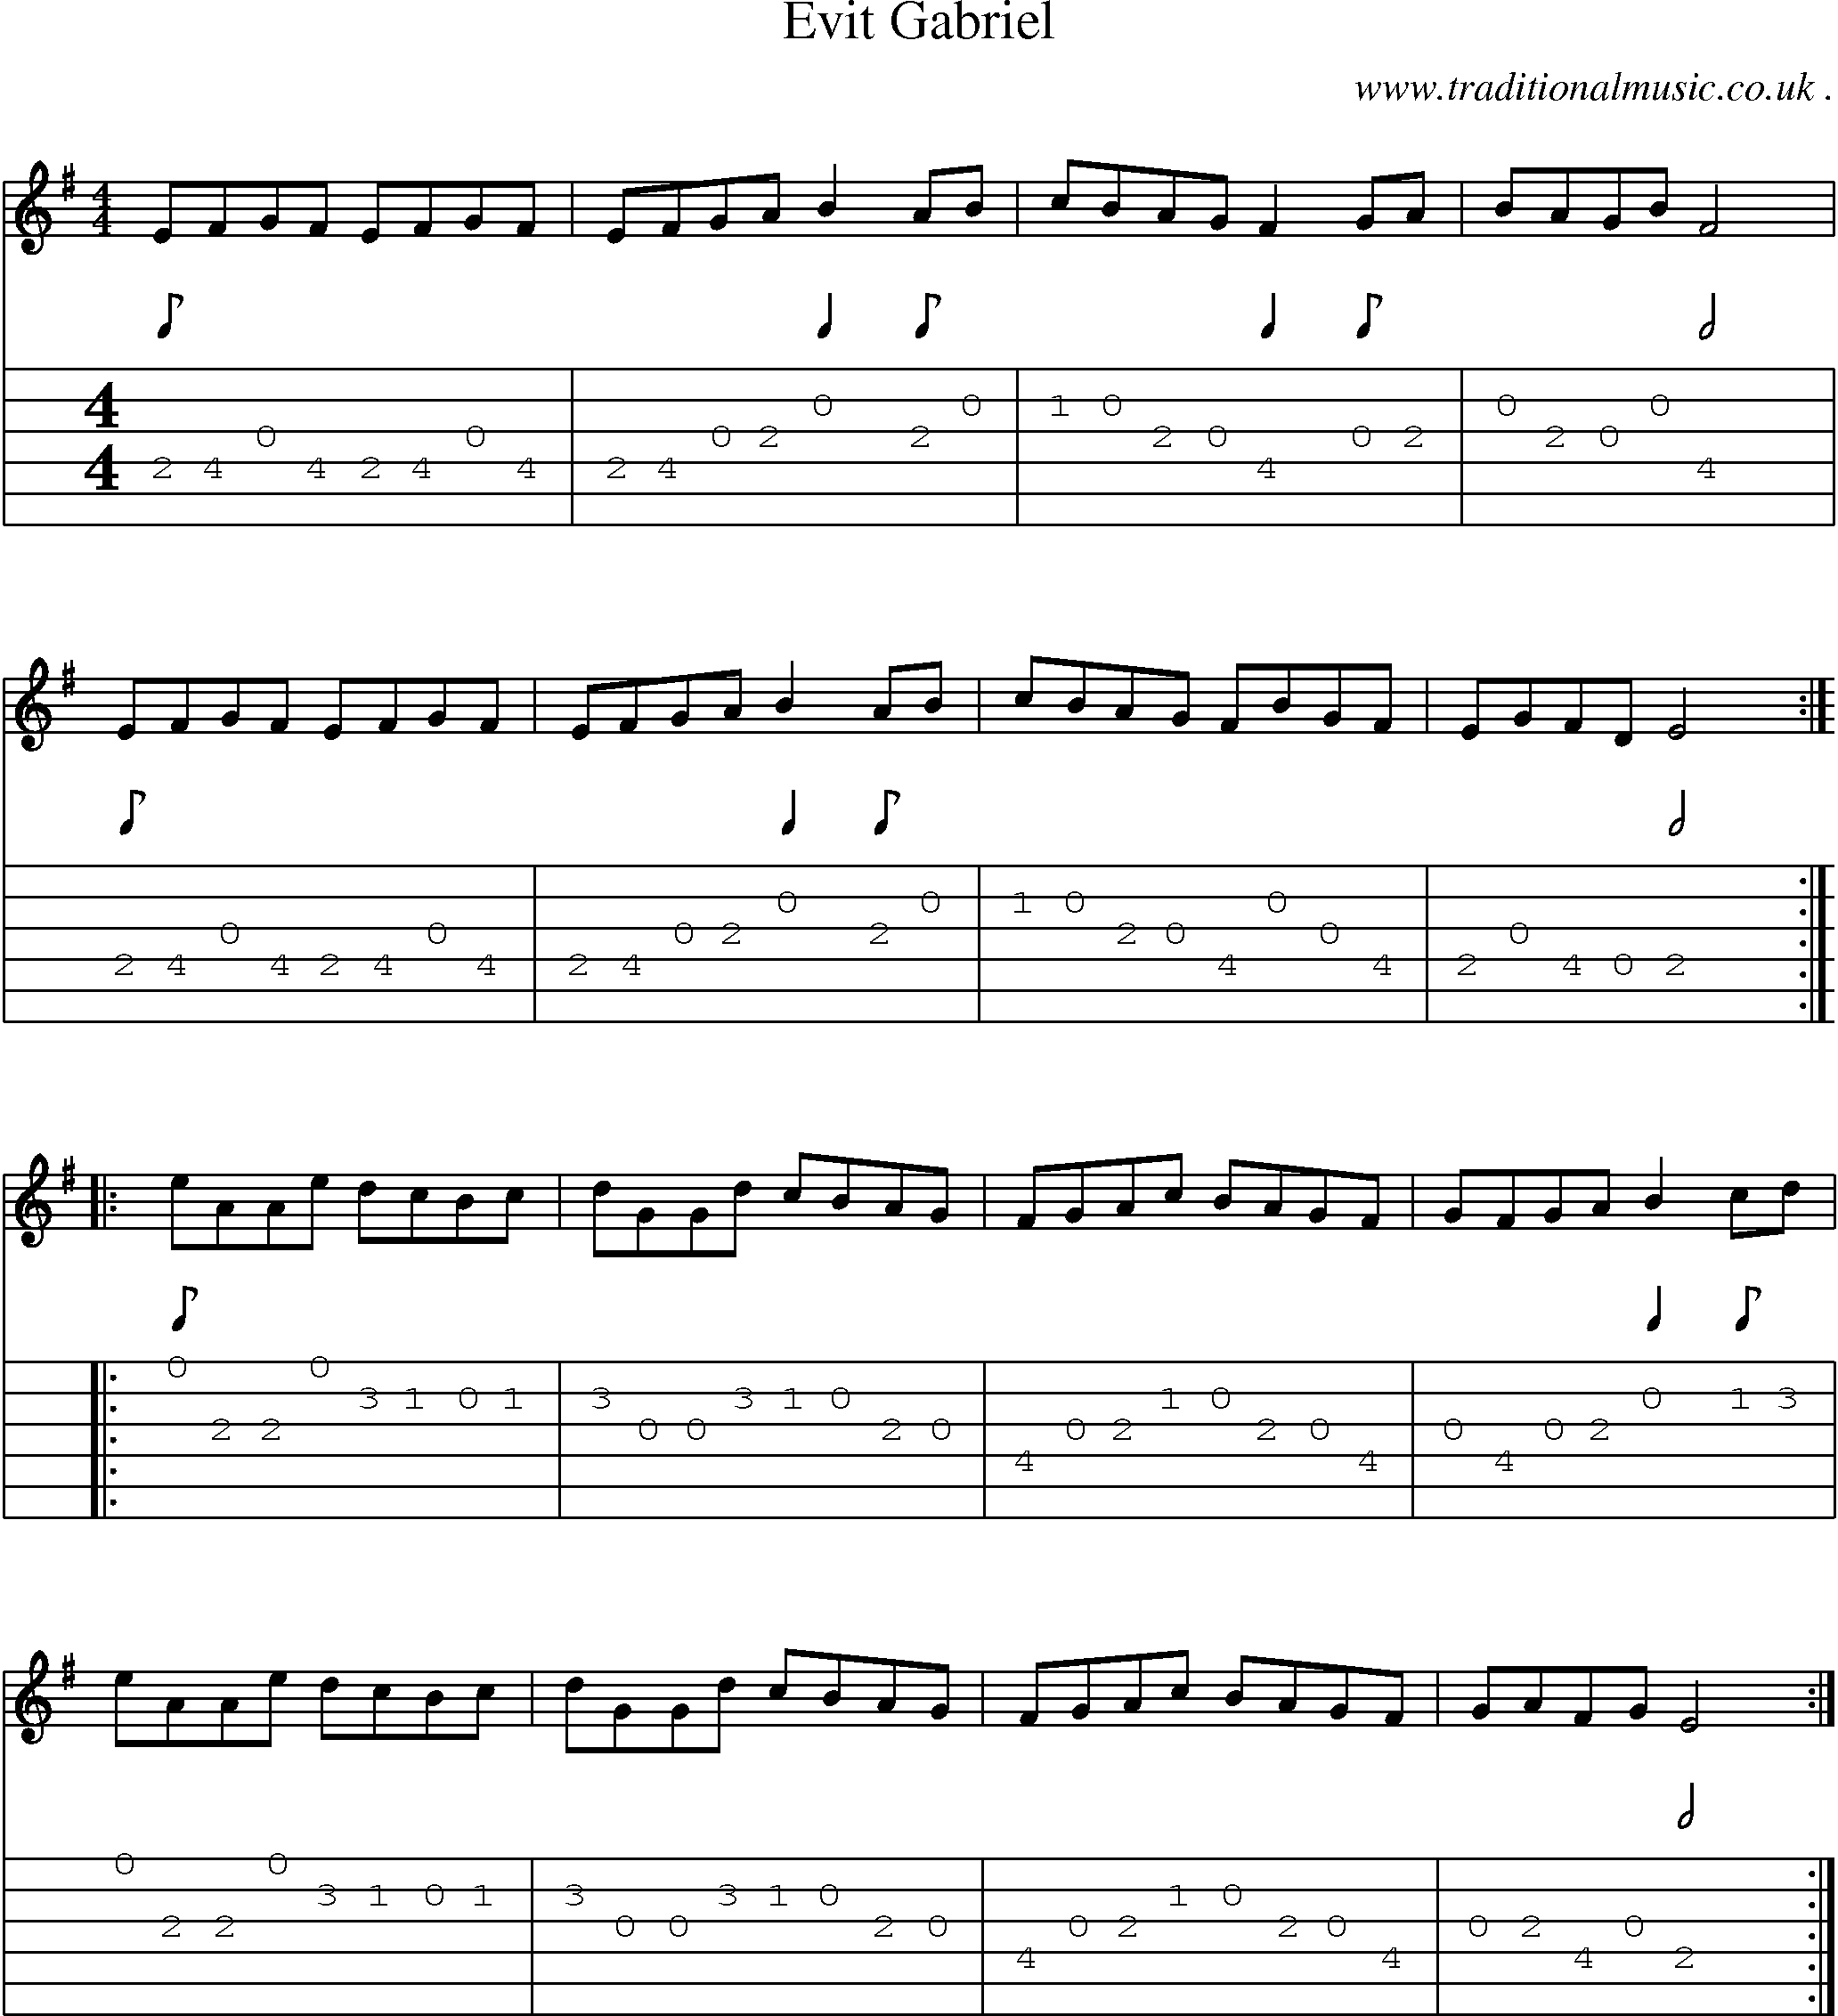 Sheet-Music and Guitar Tabs for Evit Gabriel